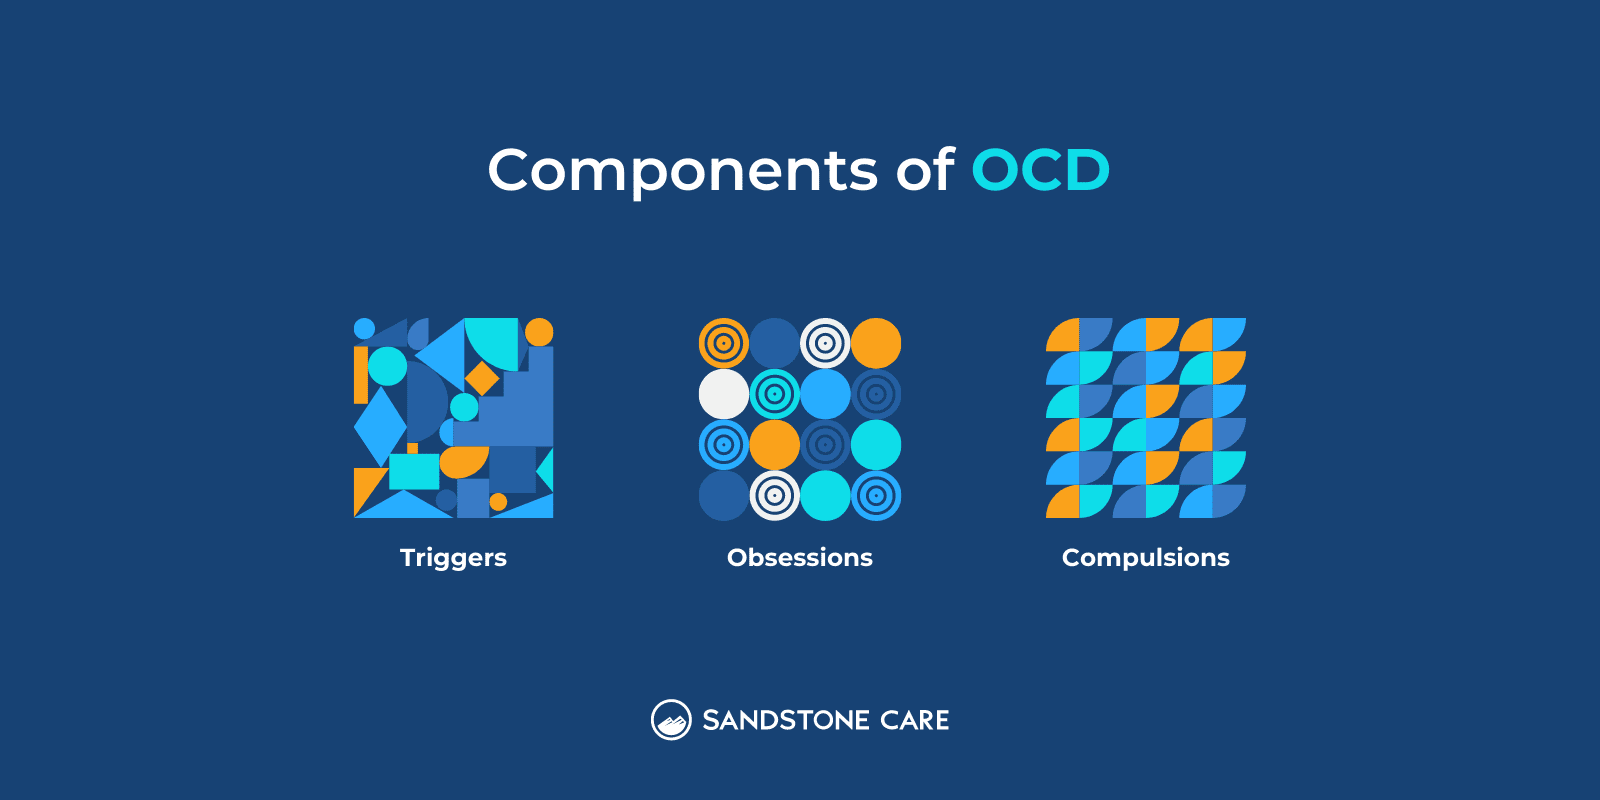 Components of OCD represented with different icons